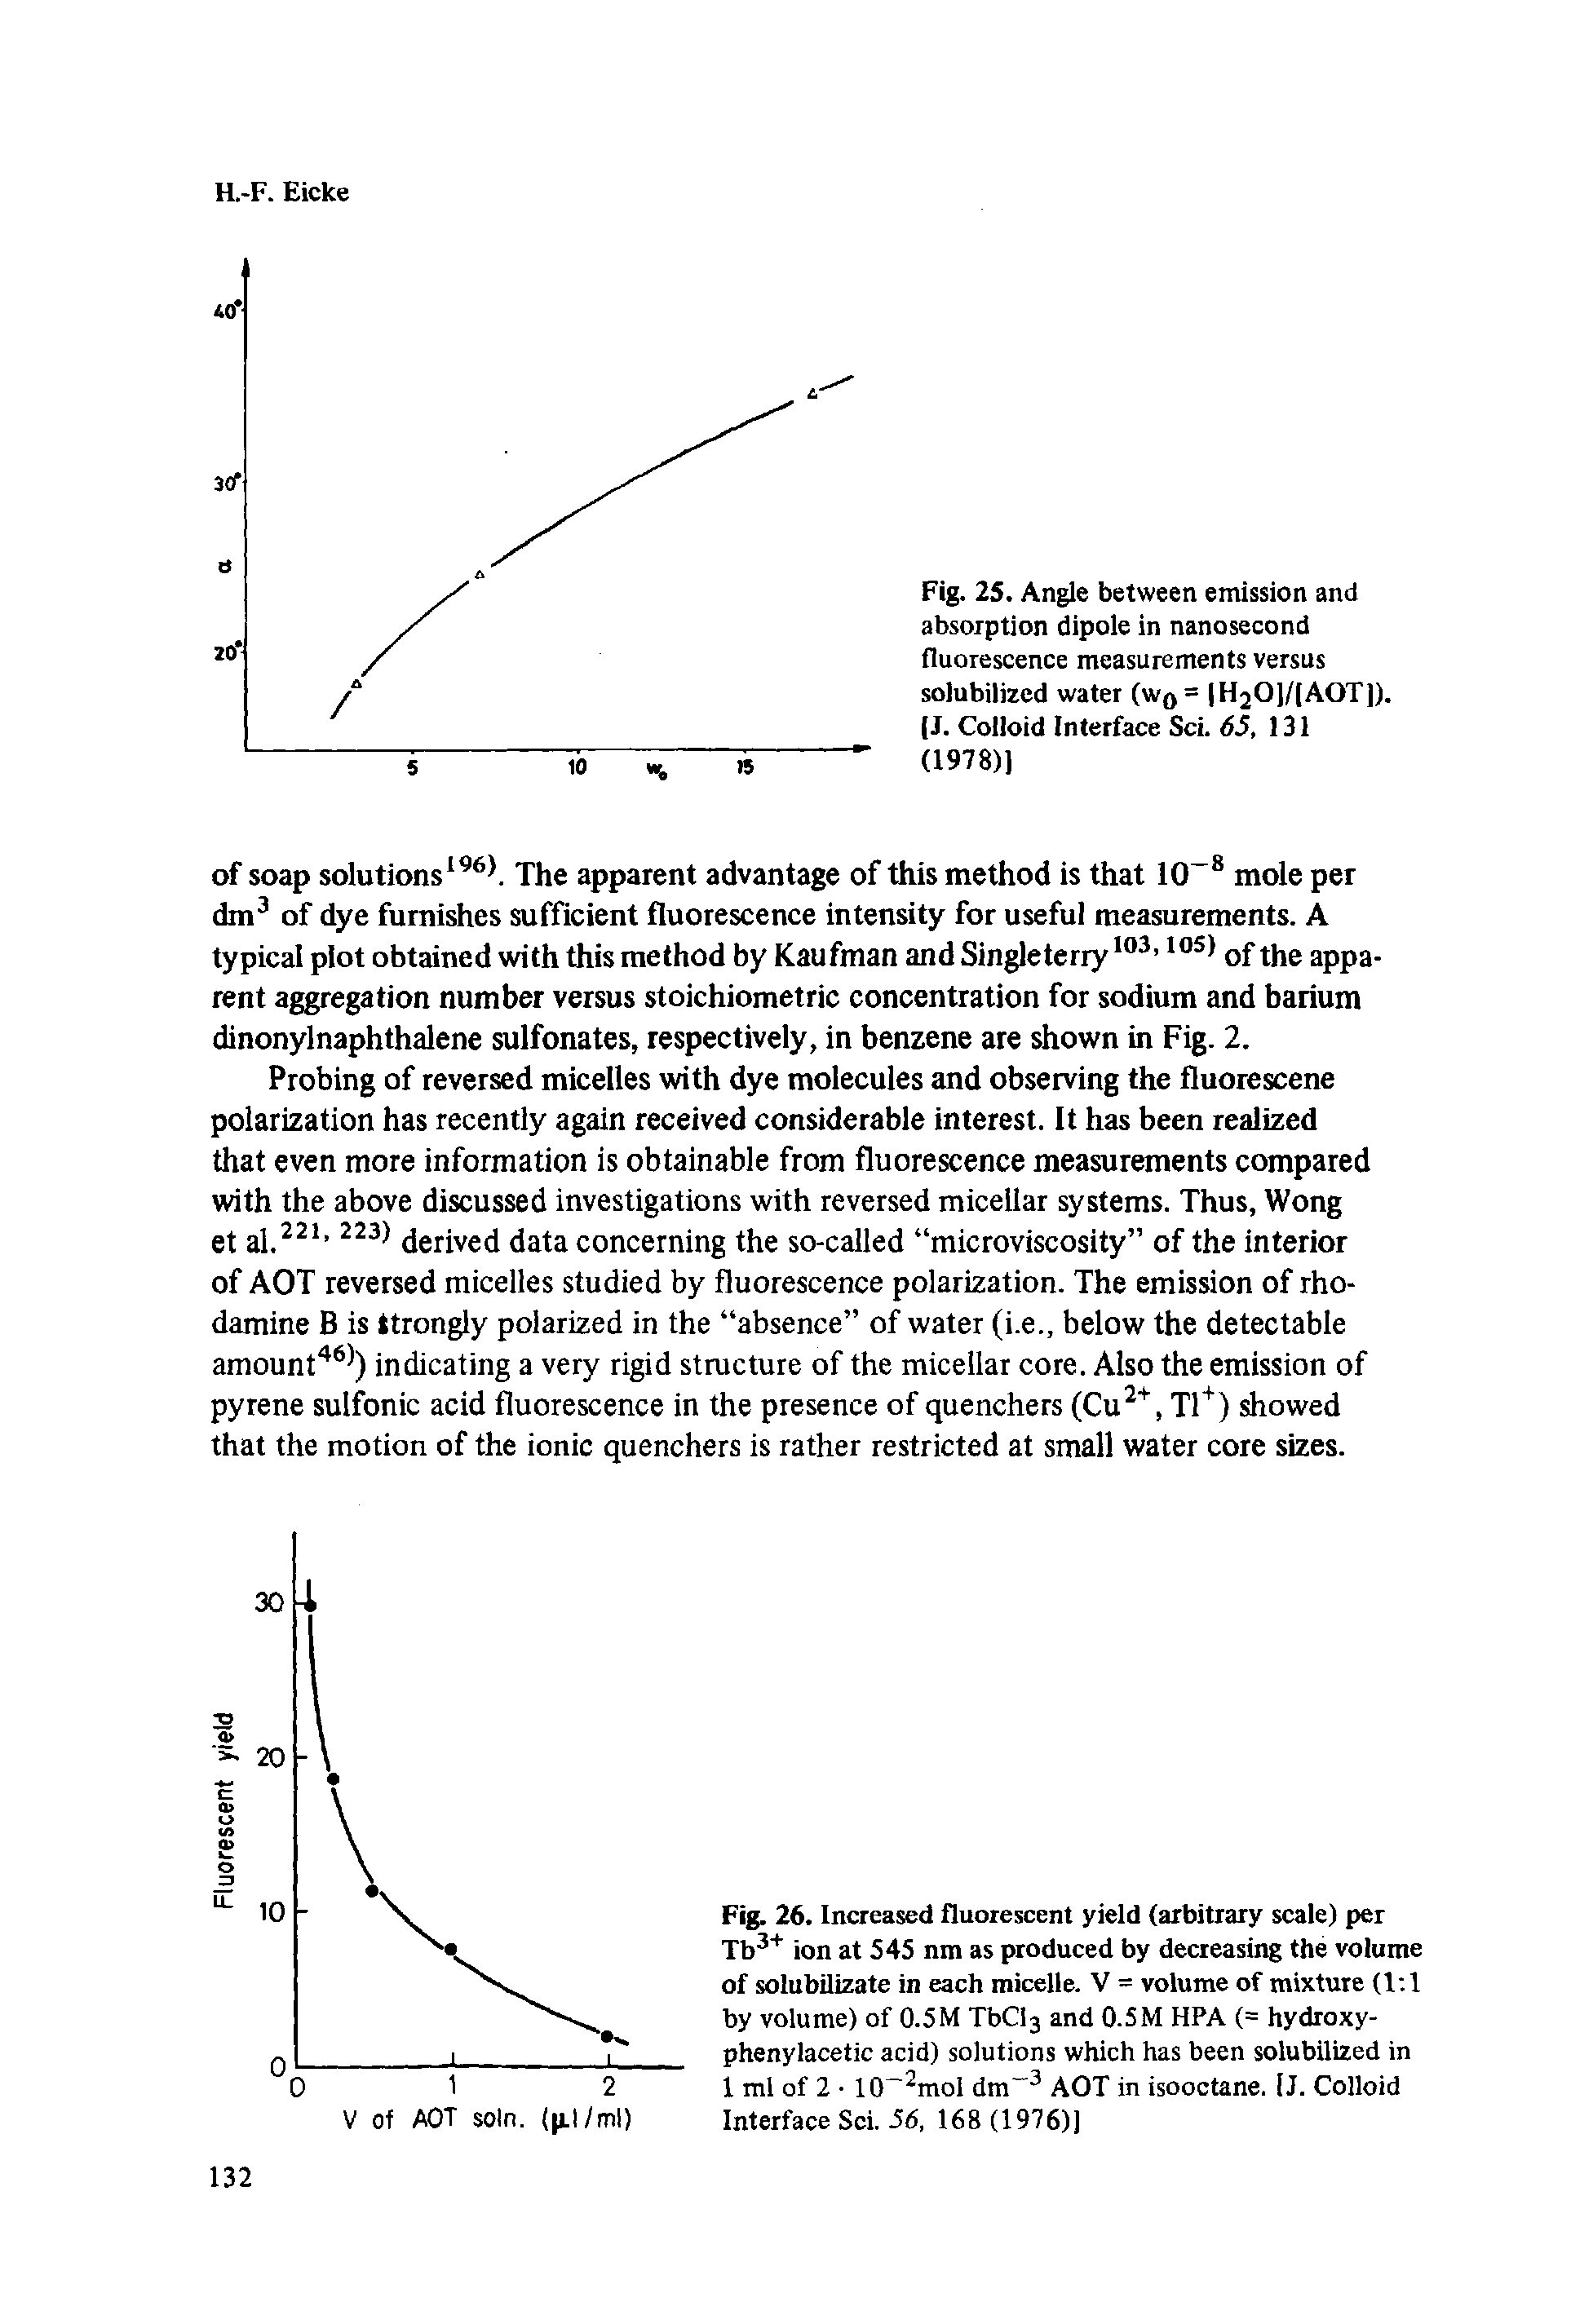 Fig. 26. Increased fluorescent yield (arbitrary scale) per Tb3+ ion at 545 nm as produced by decreasing the volume of solubilizate in each micelle. V = volume of mixture (1 1 by volume) of 0.5M TbCl3 and 0.5M HPA (= hydroxy-phenylacetic acid) solutions which has been solubilized in 1 ml of 2 10 2mol dm-3 AOT in isooctane. [J. Colloid Interface Sci. 56, 168 (1976))...